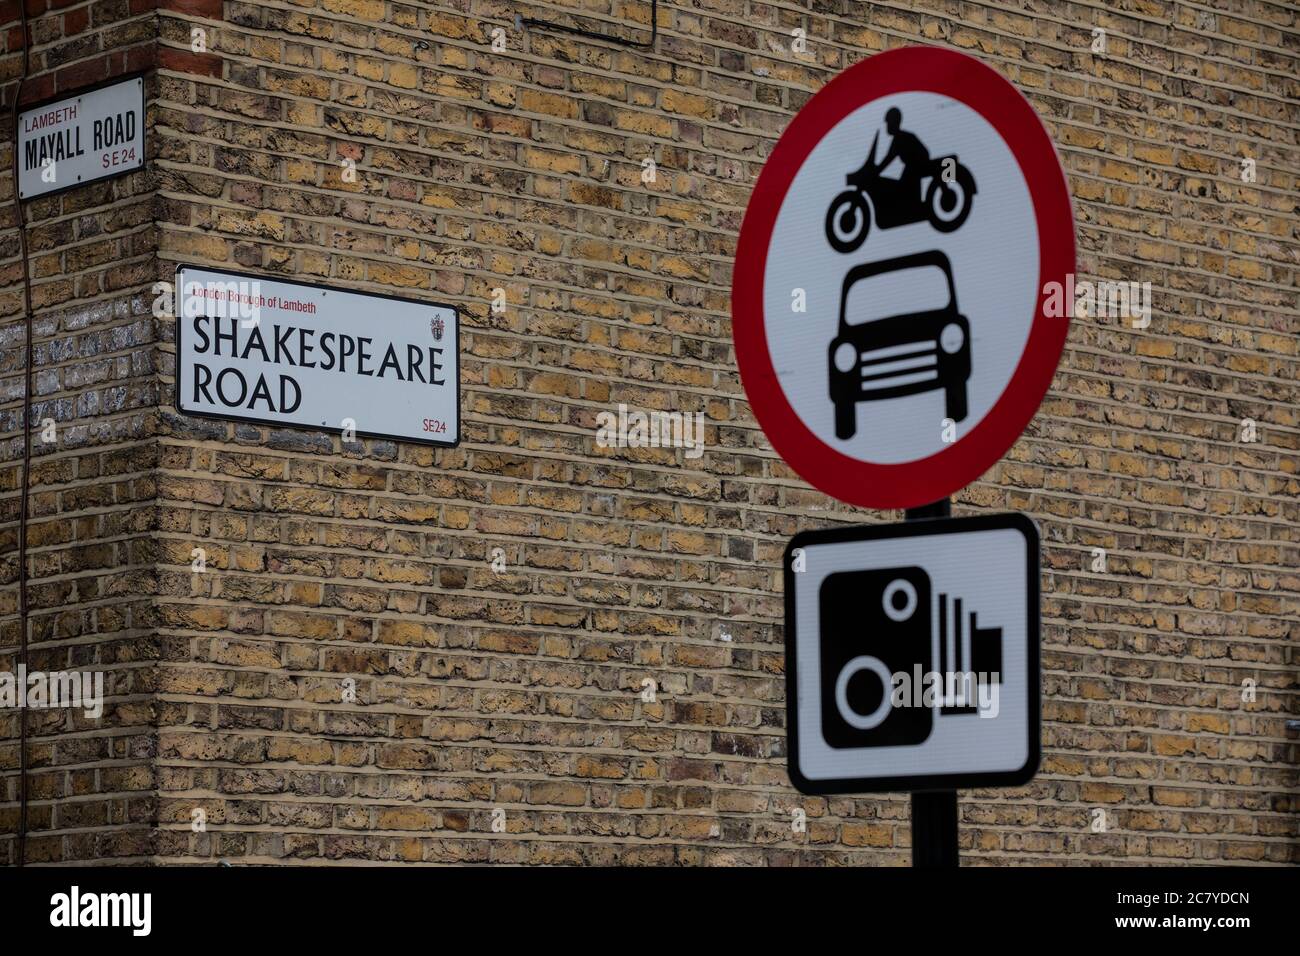 London road blocks to restrict traffic in place to create 'cycle highways' and encourage cycling & cut air pollution on Shakespeare Road, Lambeth SE24 Stock Photo